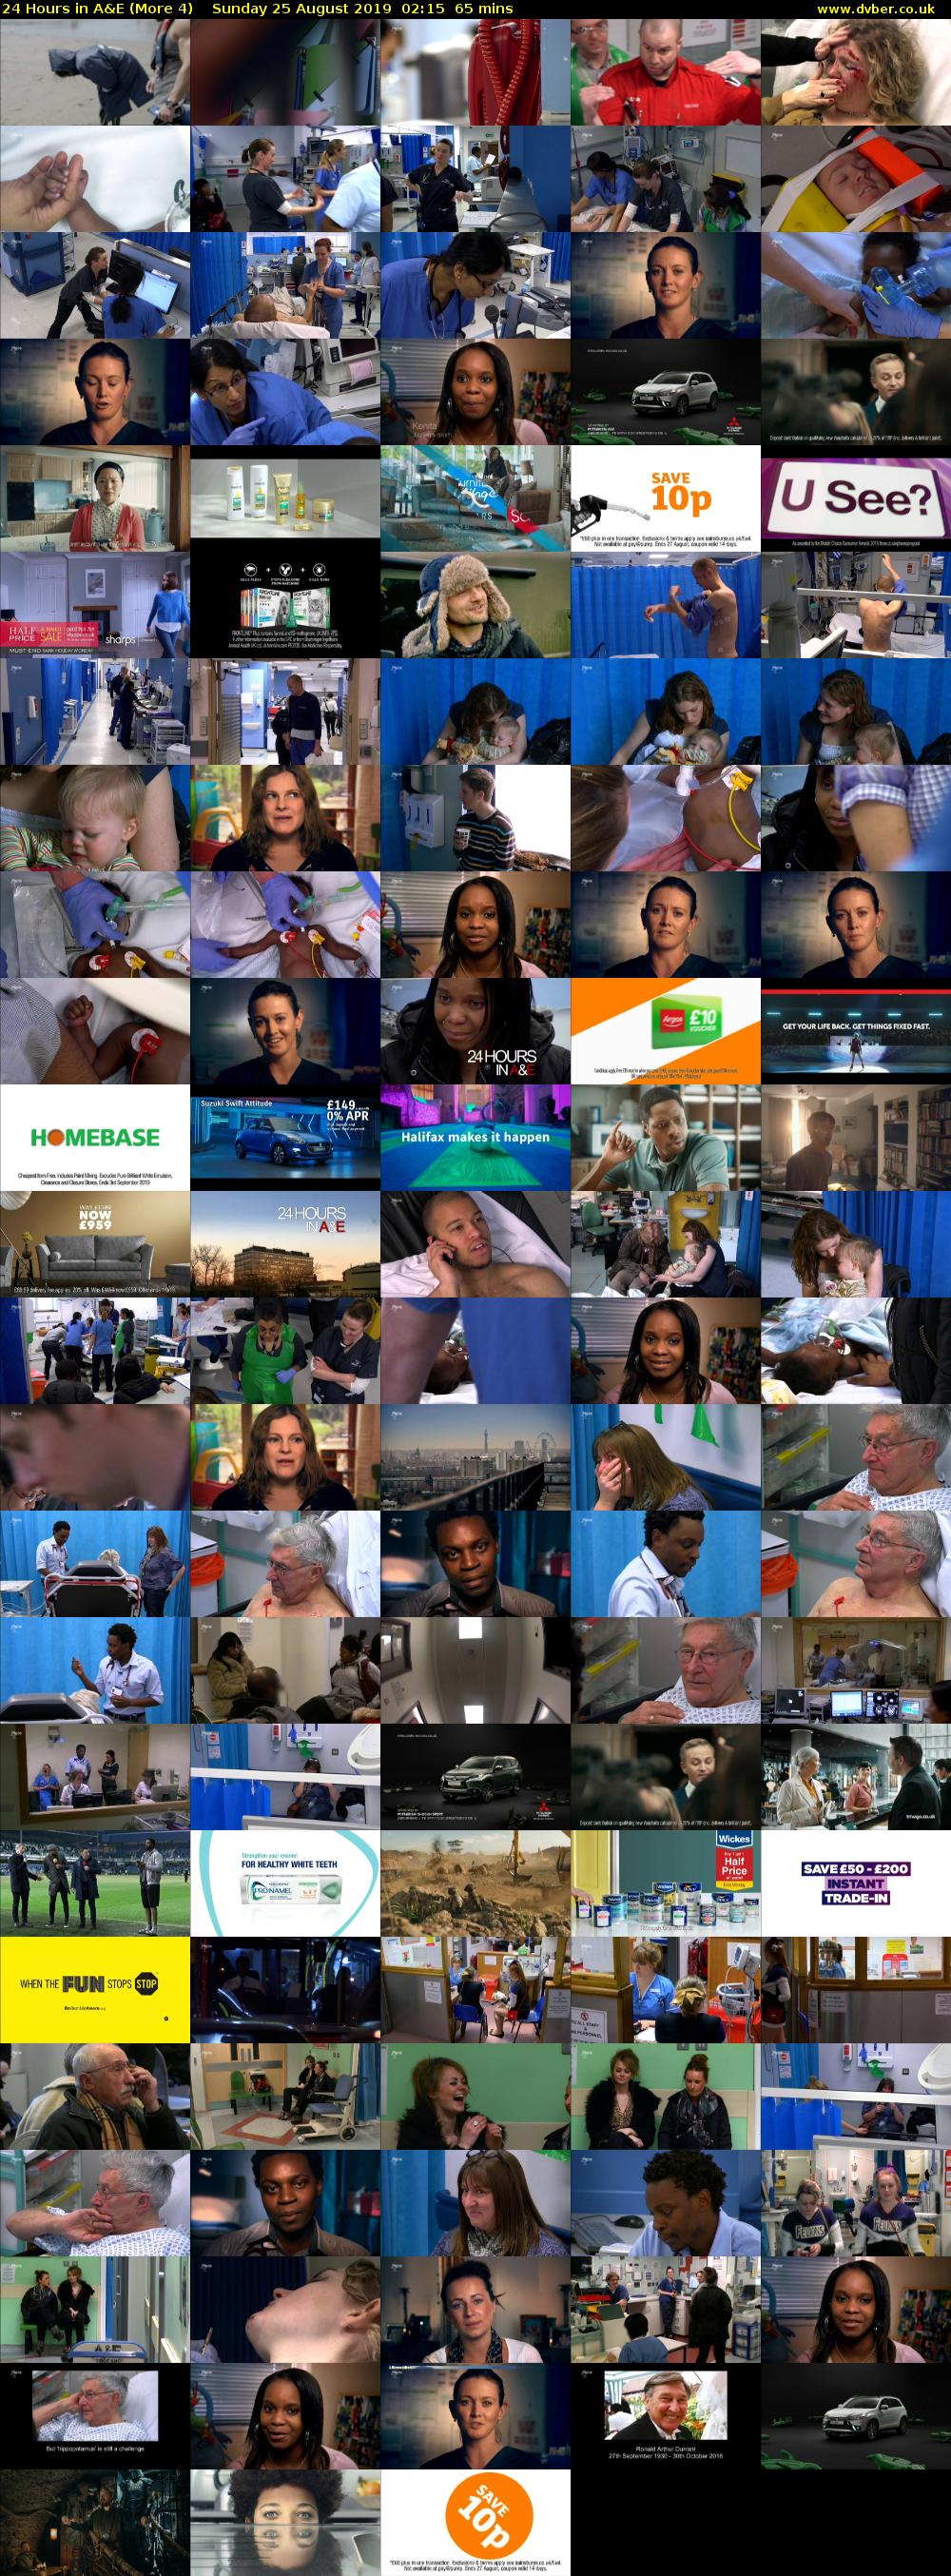 24 Hours in A&E (More 4) Sunday 25 August 2019 02:15 - 03:20